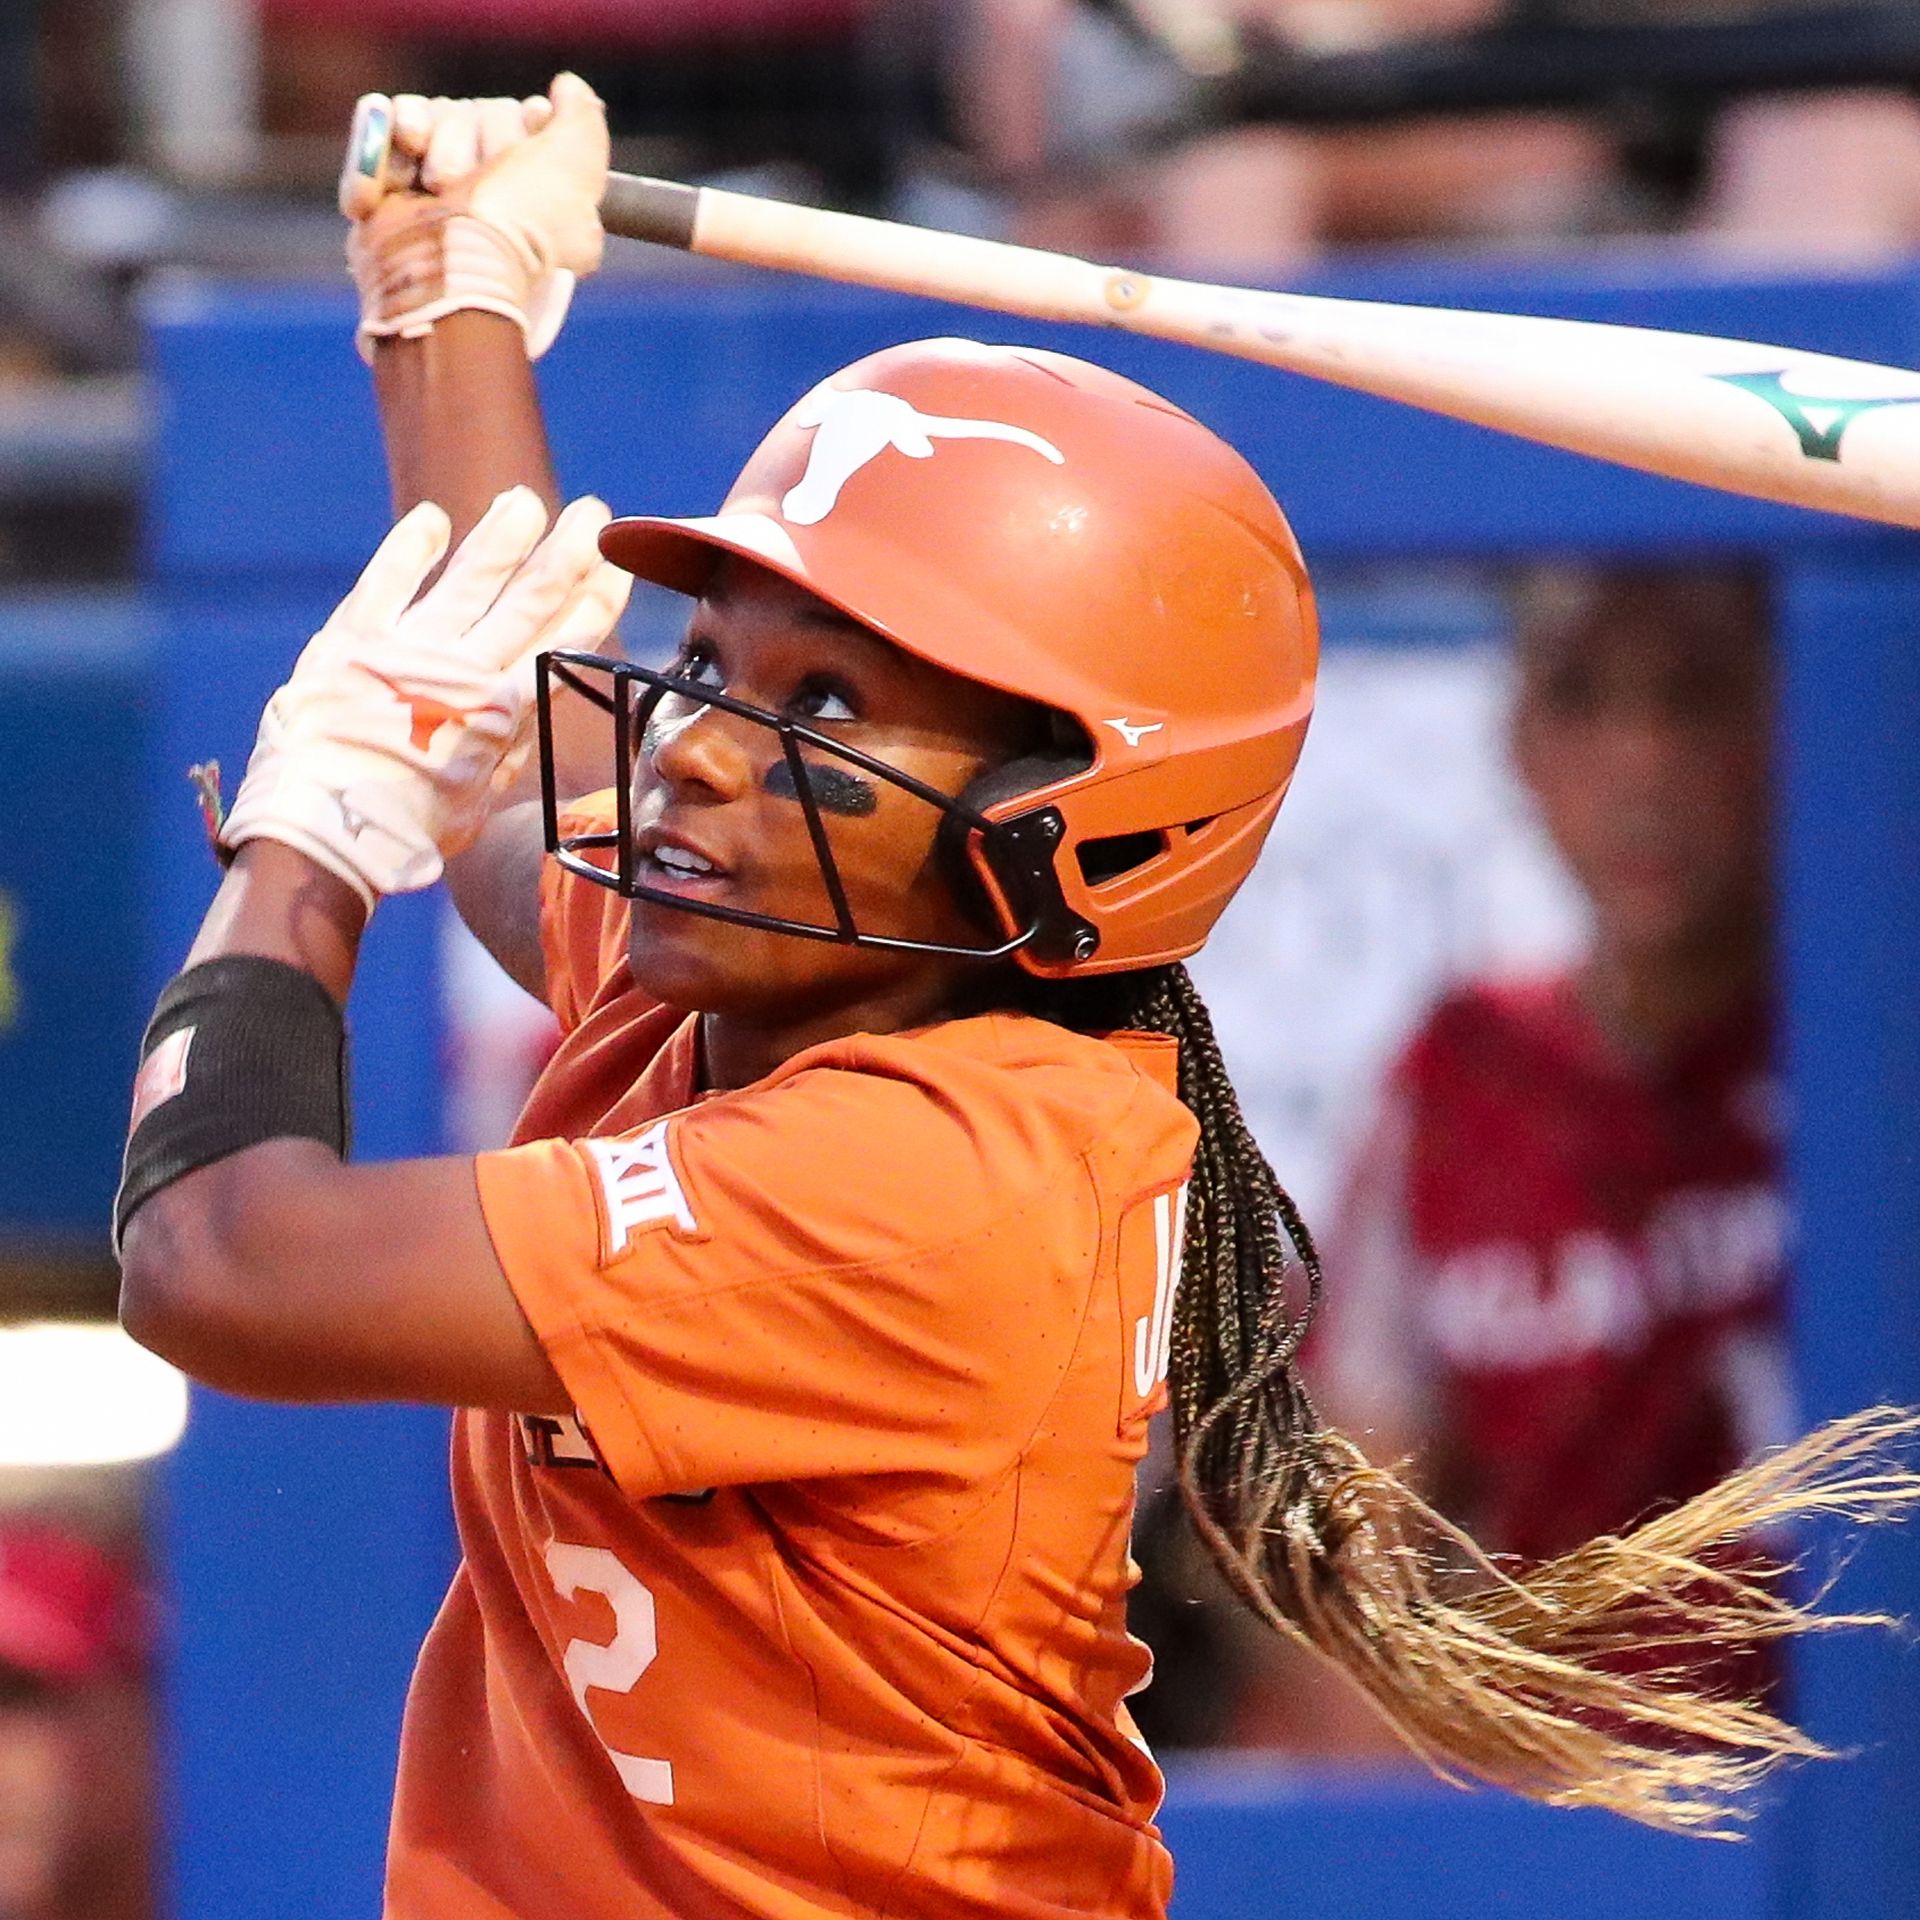 2023 Championships — Women's Professional Fastpitch